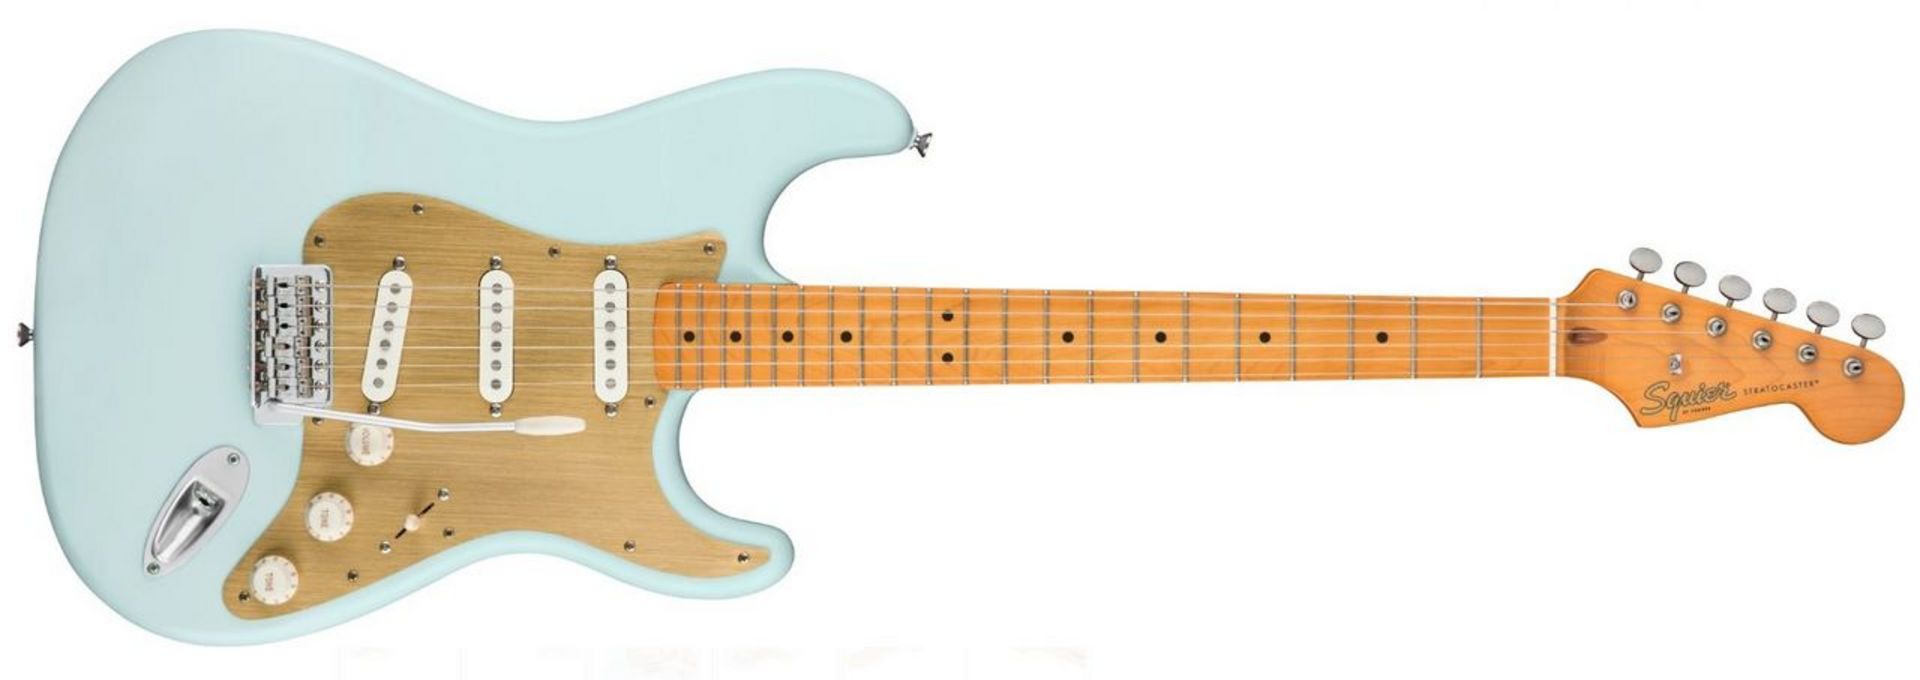 Fender Squier - 40TH ANNIVERSARY STRATOCASTER VINTAGE EDITION   Satin Sonic Blue